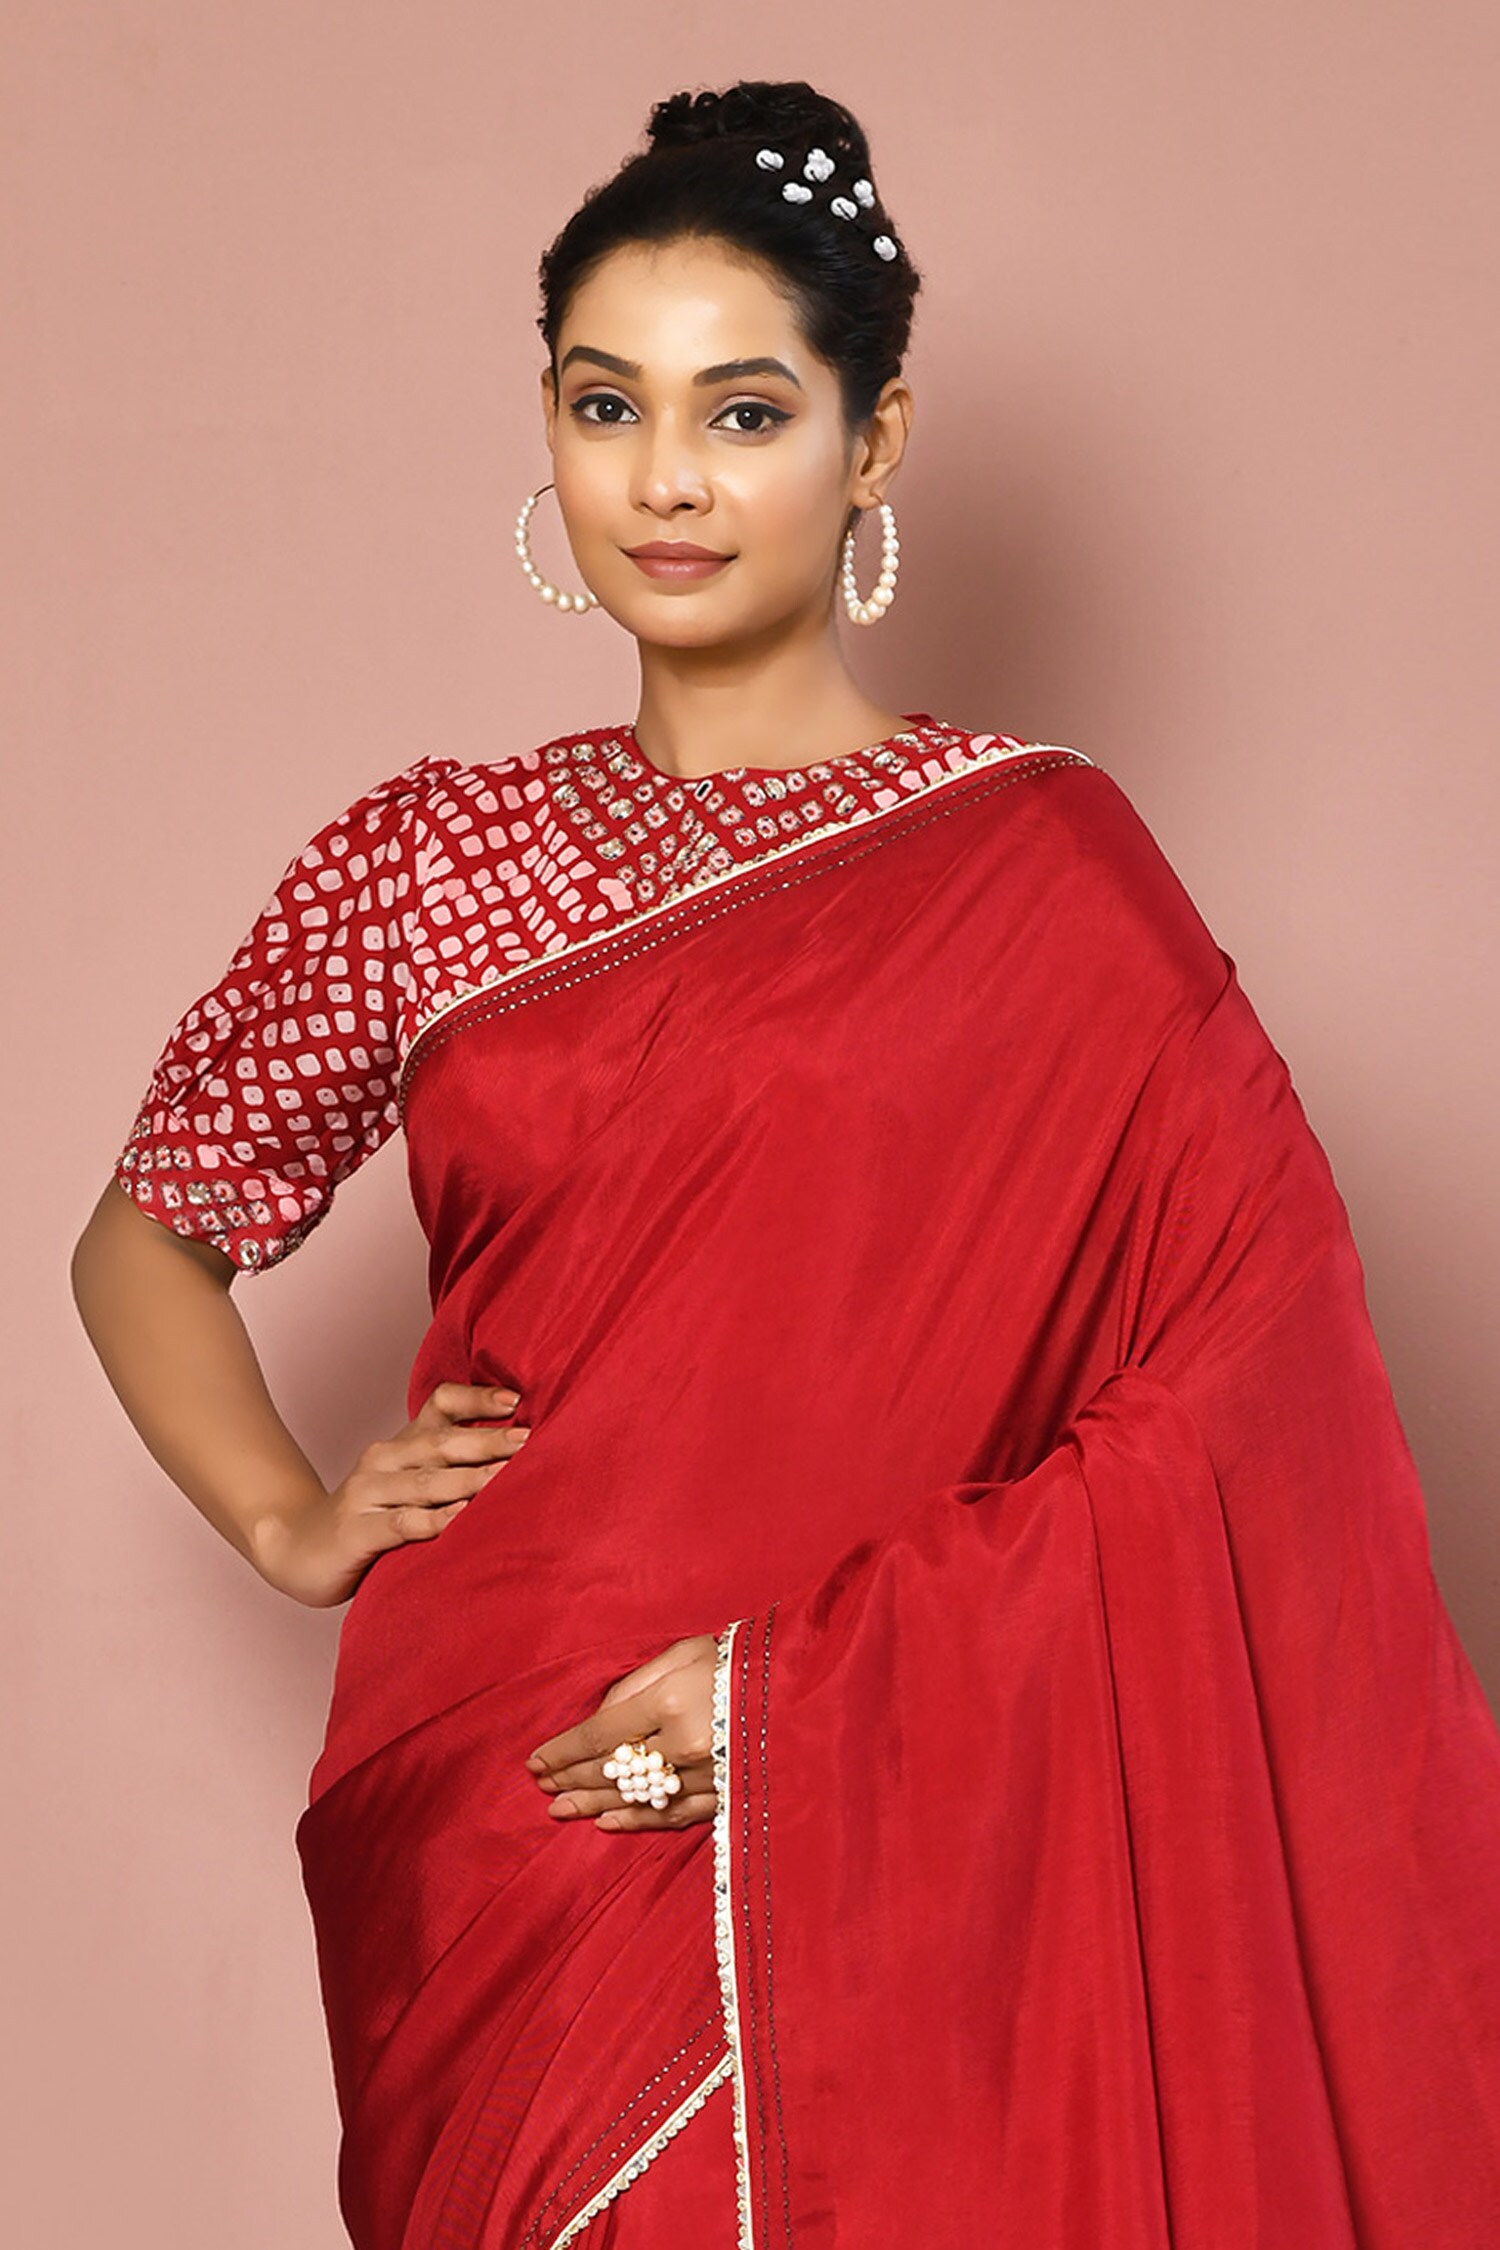 Nazaakat by Samara Singh - Red Muslin Printed Round Solid Saree With Blouse  For Women